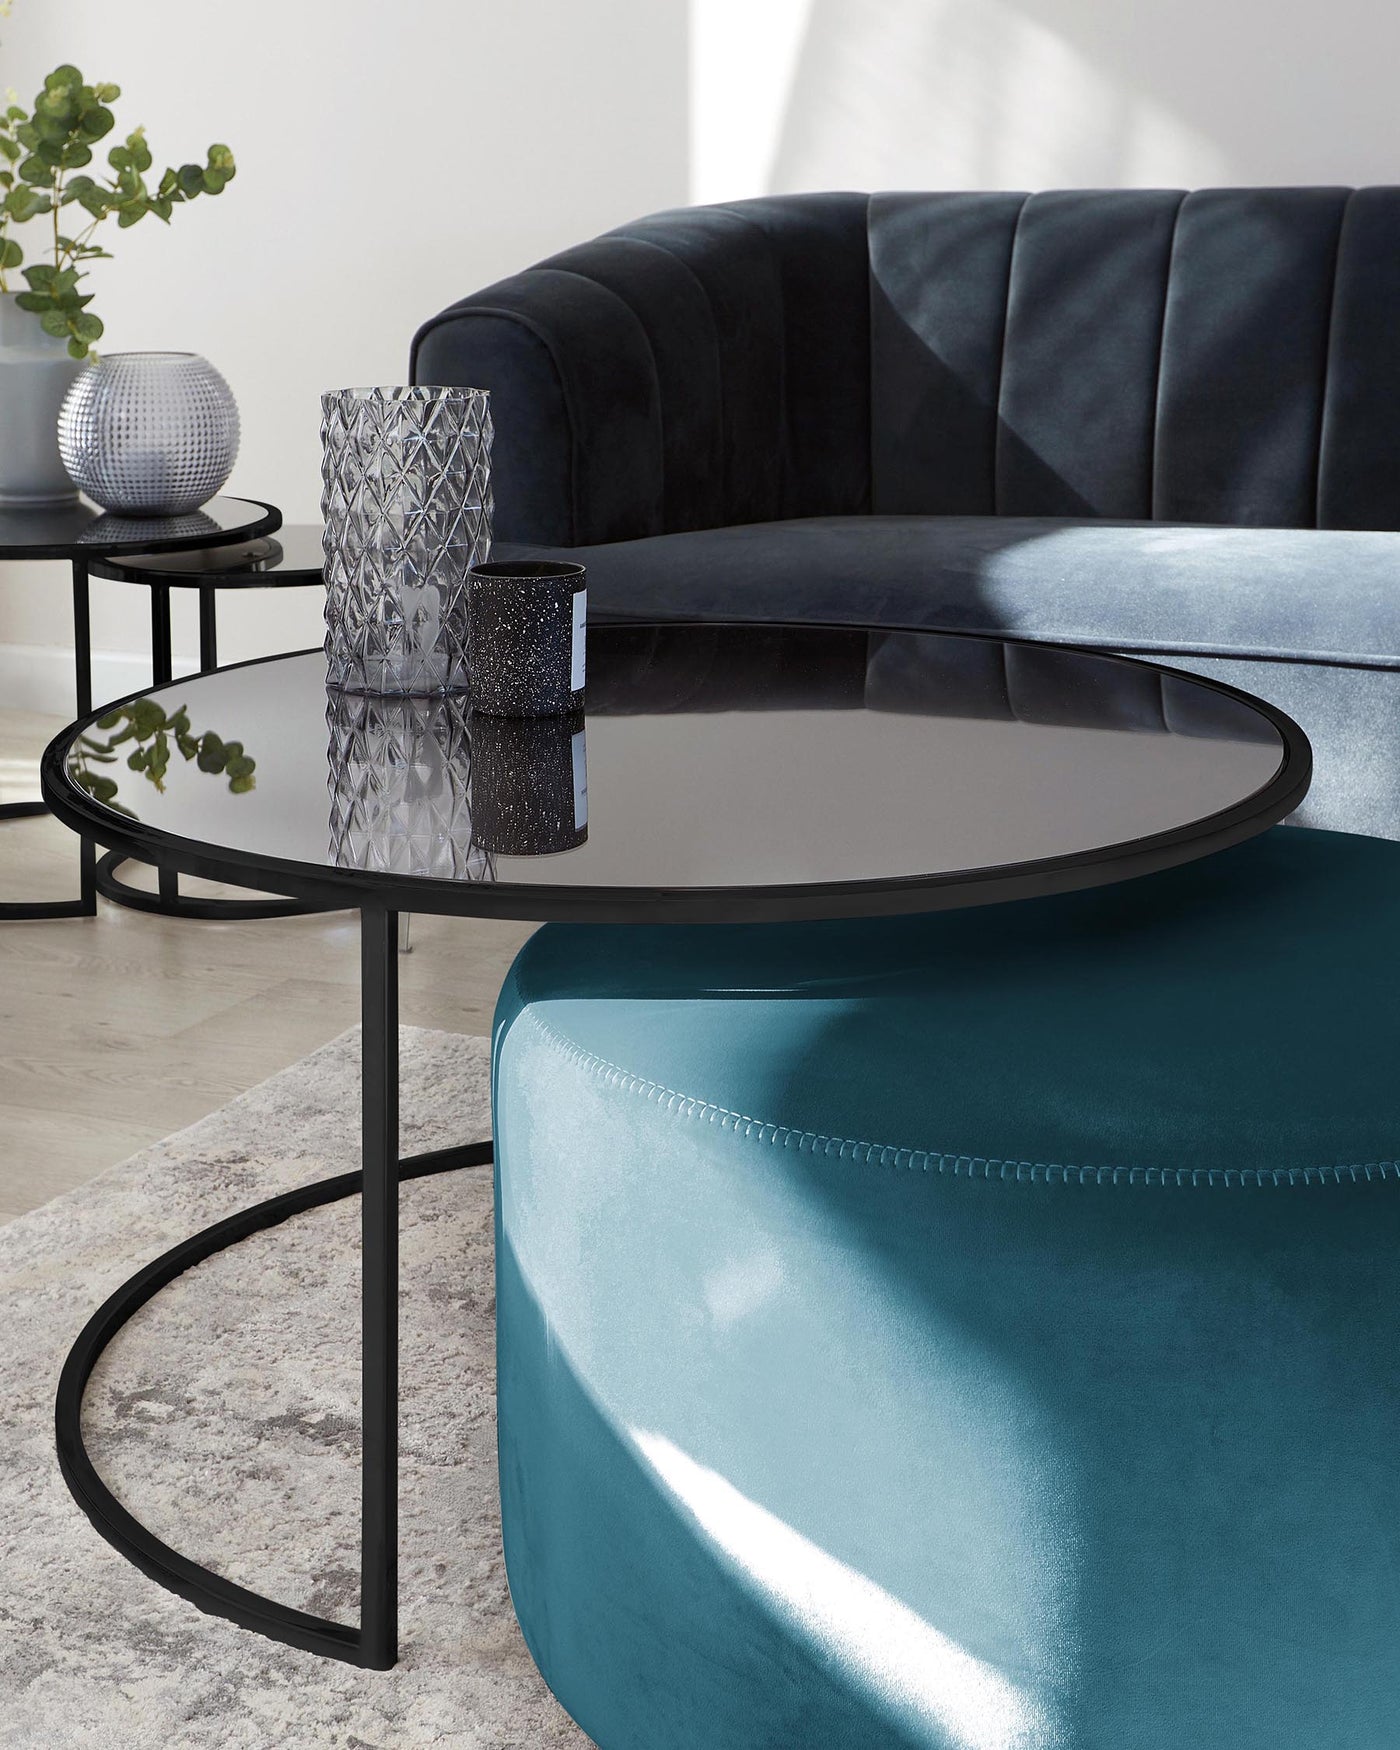 Elegant living room scene featuring a plush, curved dark grey velvet sofa, a round, teal ottoman, and a pair of circular black metal side tables with glossy black tops, accented with decorative vases.